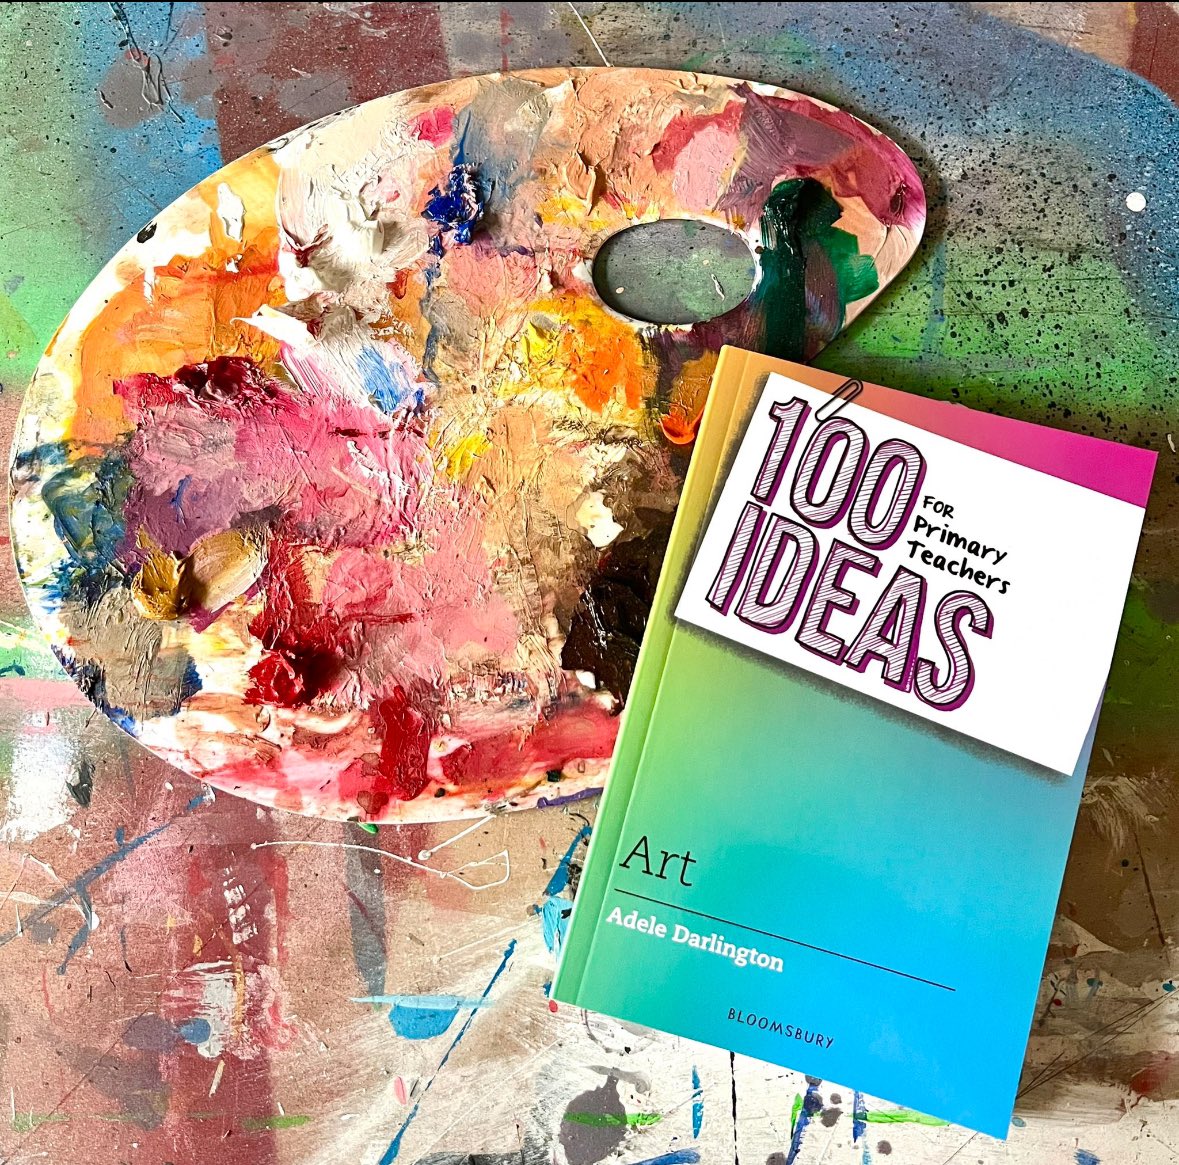 To celebrate the bank holiday I’m giving away a copy of my book ‘100 Ideas for Primary Teachers: Art’ Simply like this post and retweet and a winner will be chosen at random on Wednesday 8/5 at 8pm. Winner will be notified on my feed, not via DM. GOOD LUCK!